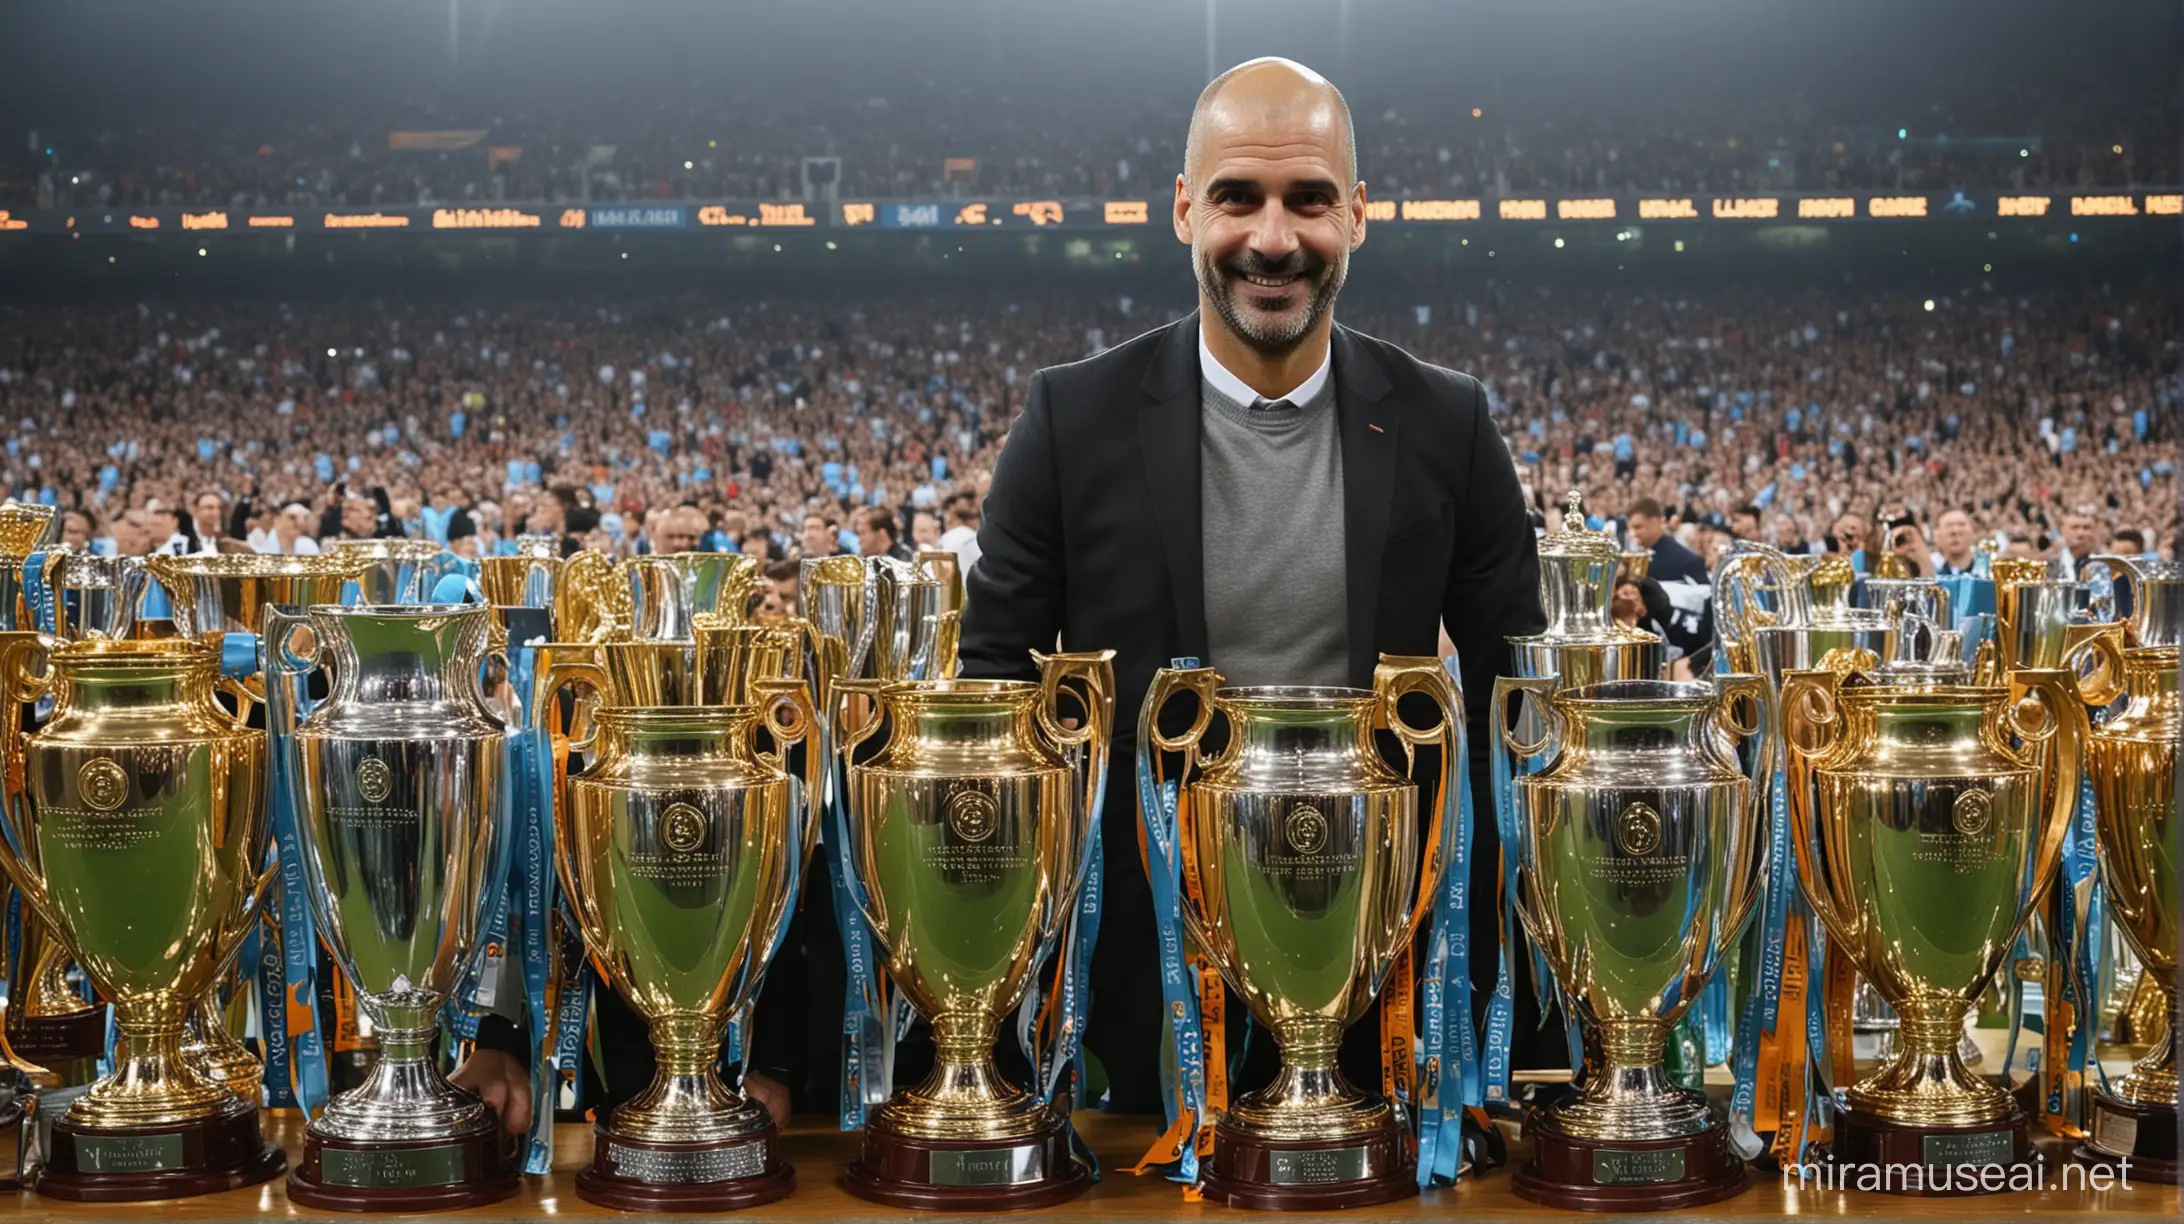 Imagine Pep Guardiola surrounded by trophies